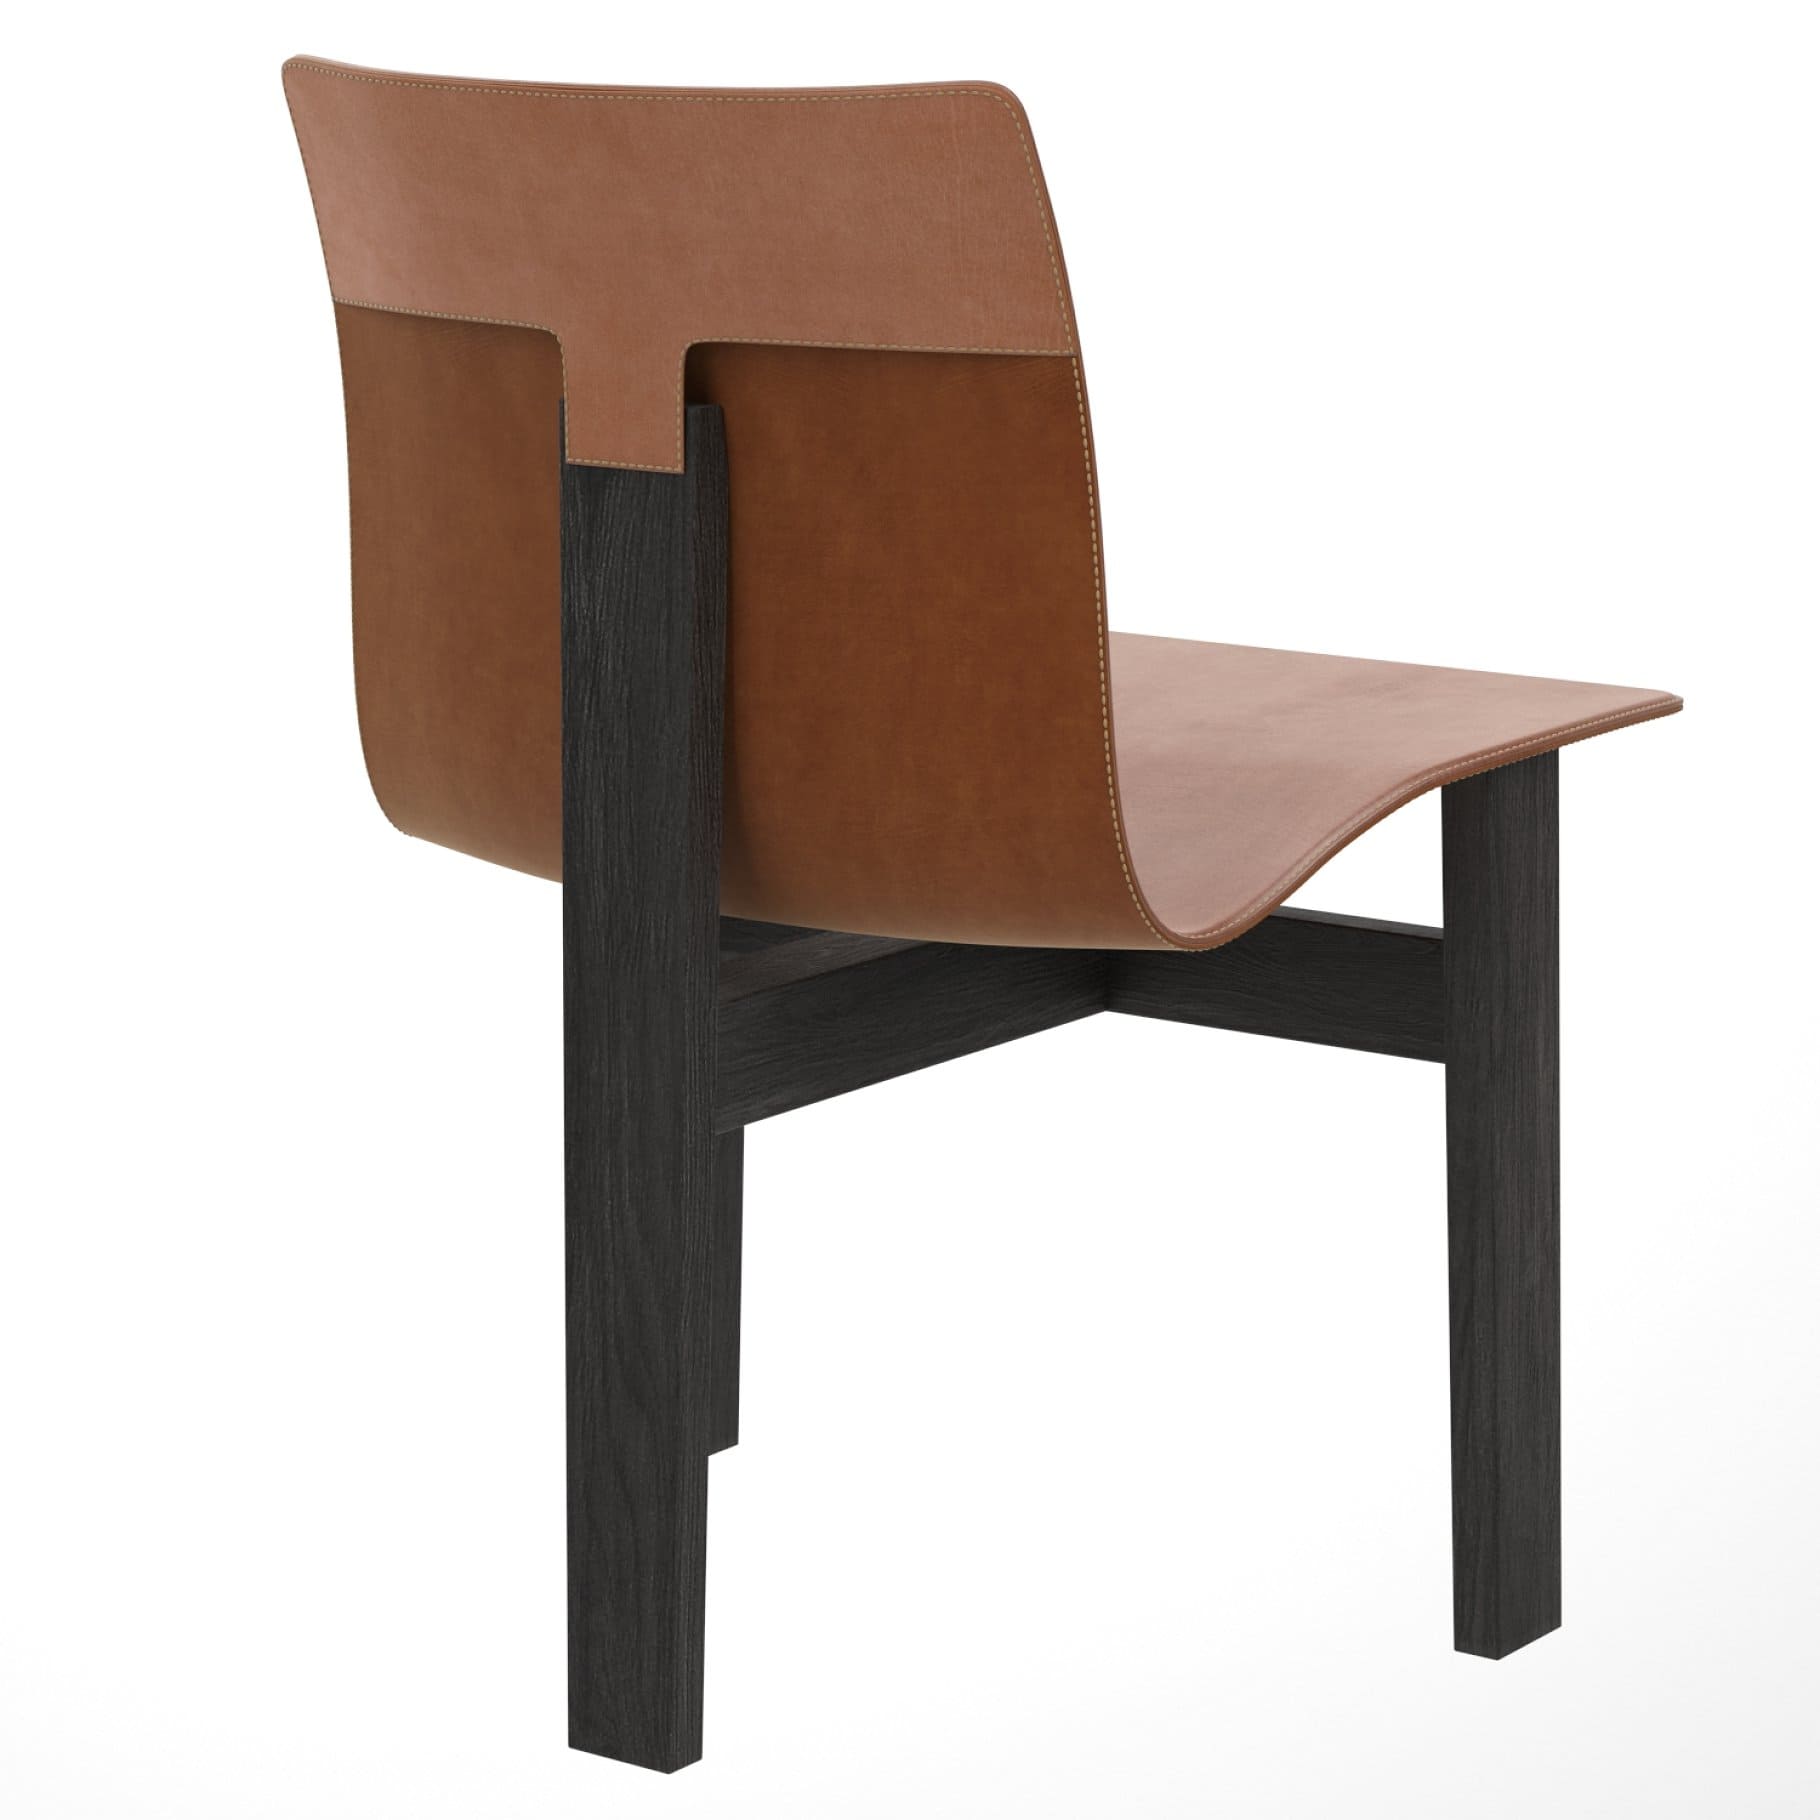 Back view of Tre 3 wooden chair with curved back.